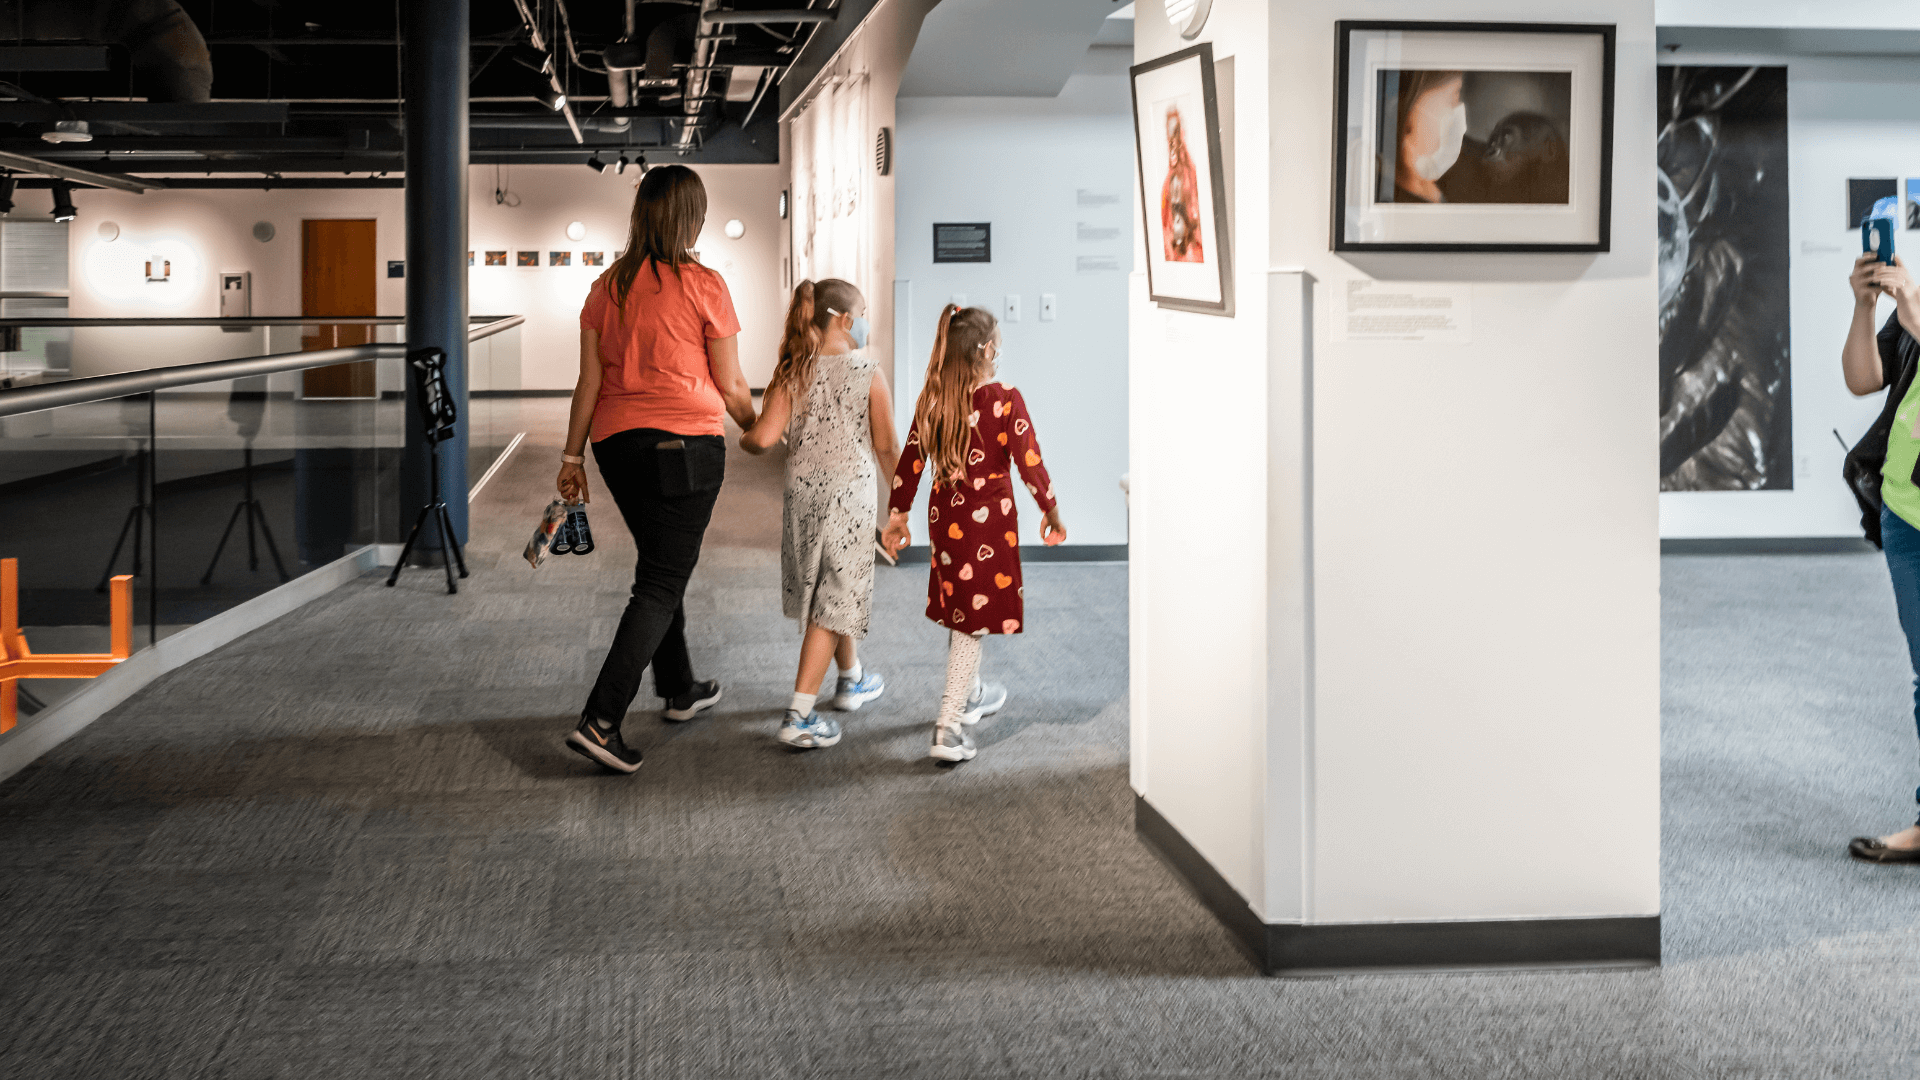 A woman and two young girls stroll through an art gallery